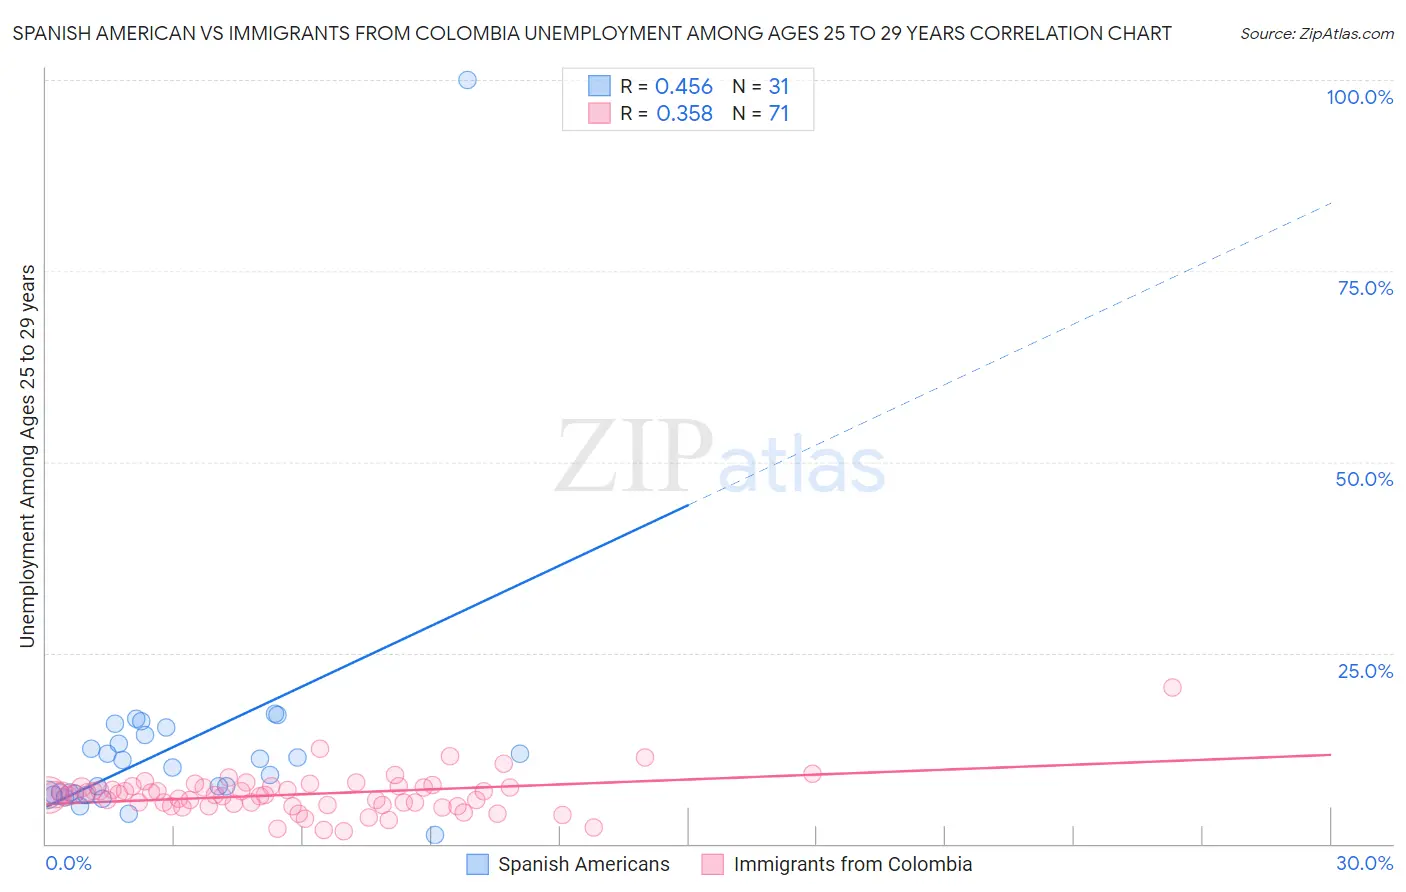 Spanish American vs Immigrants from Colombia Unemployment Among Ages 25 to 29 years